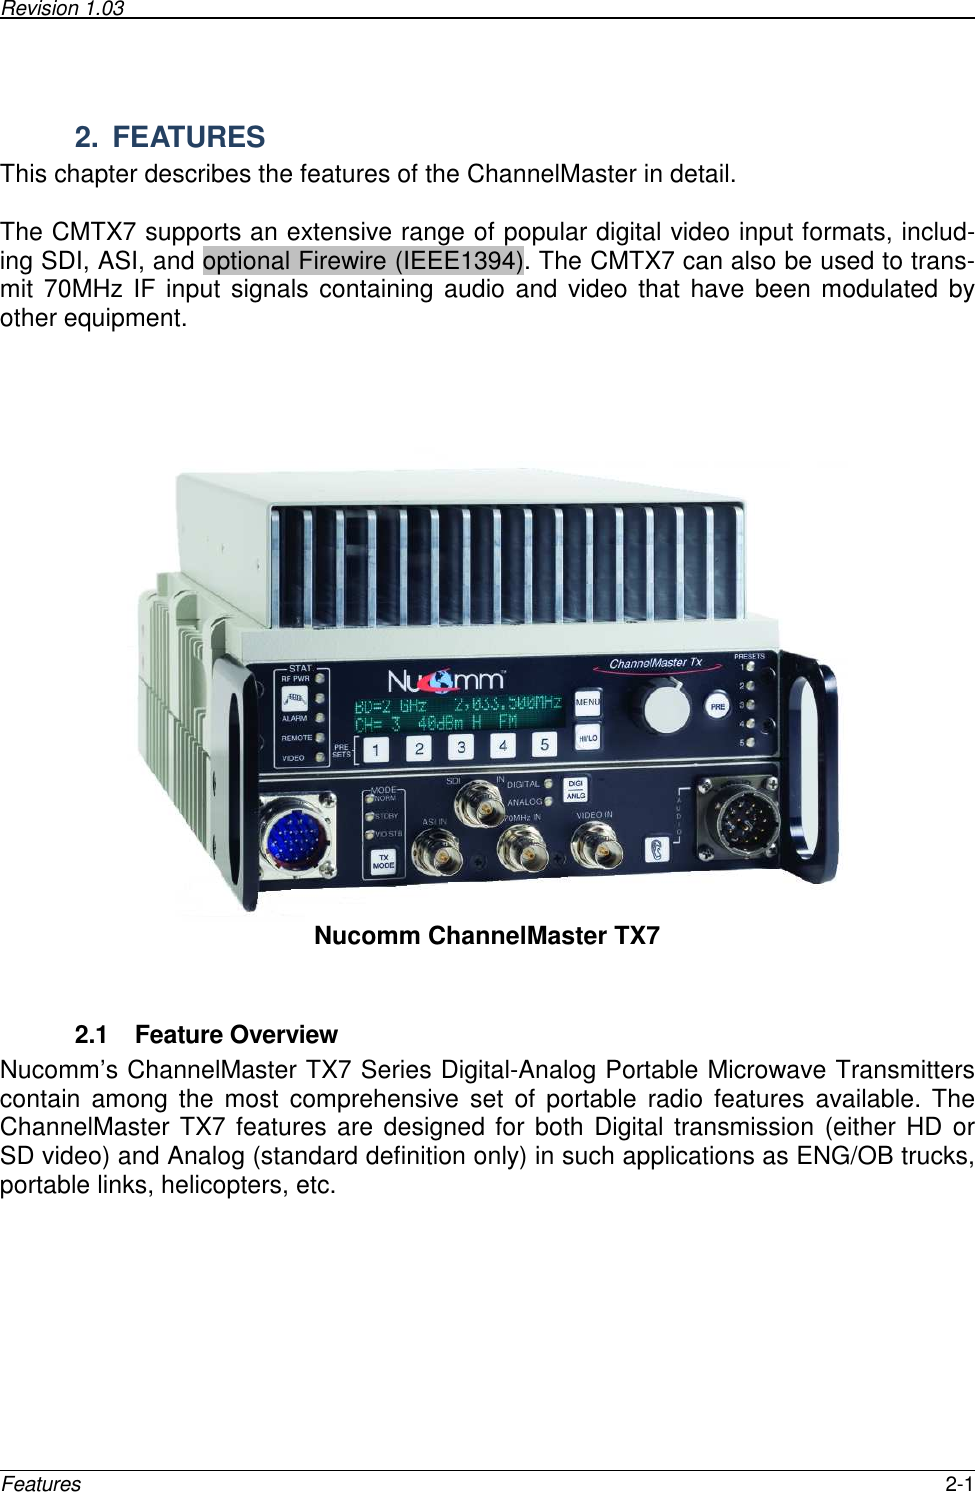 Revision 1.03      Features  2-1  2.  FEATURES This chapter describes the features of the ChannelMaster in detail.   The CMTX7 supports an extensive range of popular digital video input formats, includ-ing SDI, ASI, and optional Firewire (IEEE1394). The CMTX7 can also be used to trans-mit 70MHz IF input signals containing audio and video that have been modulated  by other equipment.       Nucomm ChannelMaster TX7   2.1  Feature Overview Nucomm’s ChannelMaster TX7 Series Digital-Analog Portable Microwave Transmitters contain  among  the  most  comprehensive  set  of  portable  radio  features  available.  The ChannelMaster TX7 features are designed for both Digital transmission (either HD or SD video) and Analog (standard definition only) in such applications as ENG/OB trucks, portable links, helicopters, etc.    